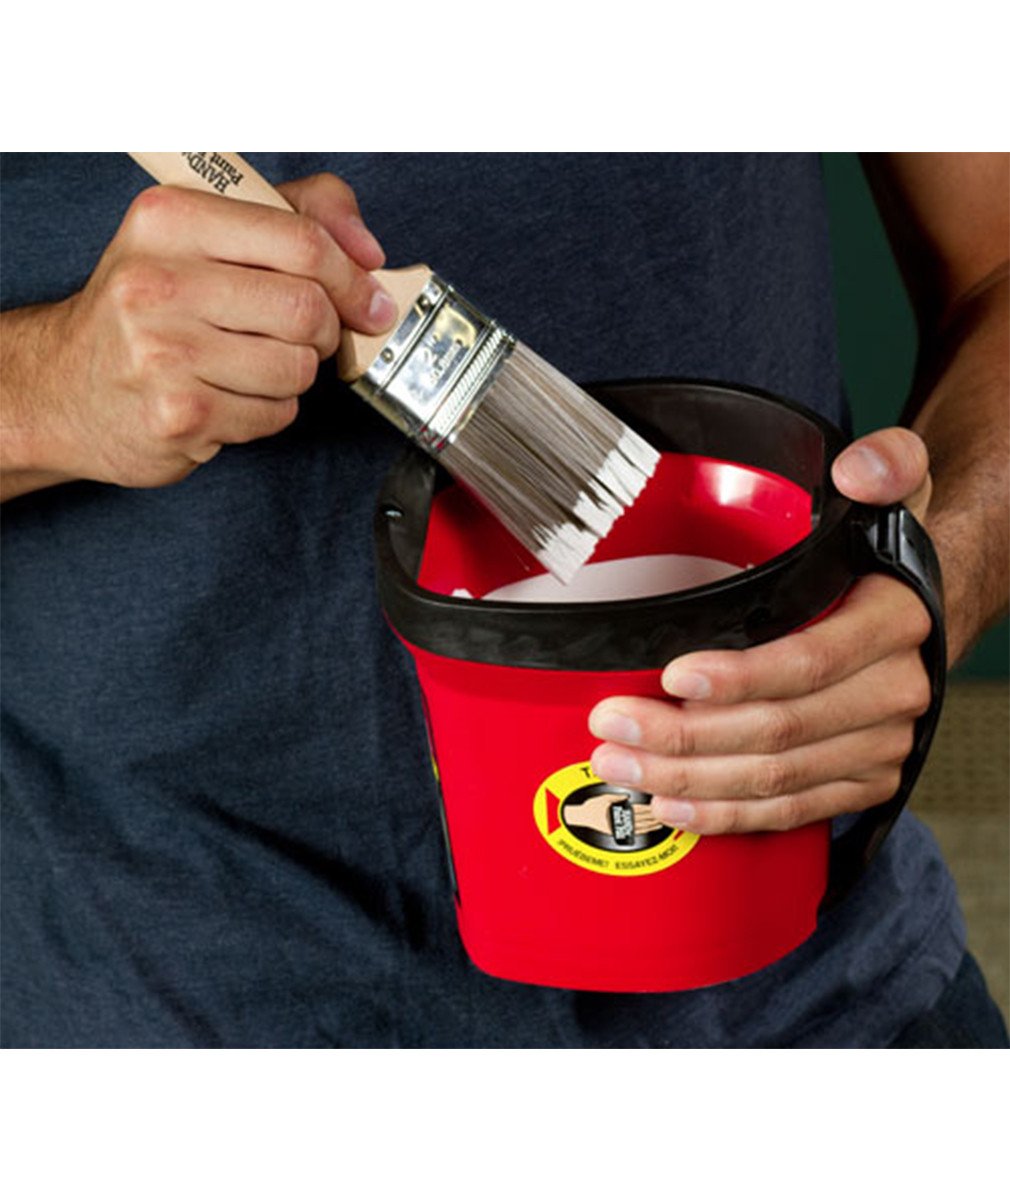 HANDy Paint Pail, available at JC Licht in Chicago, IL.